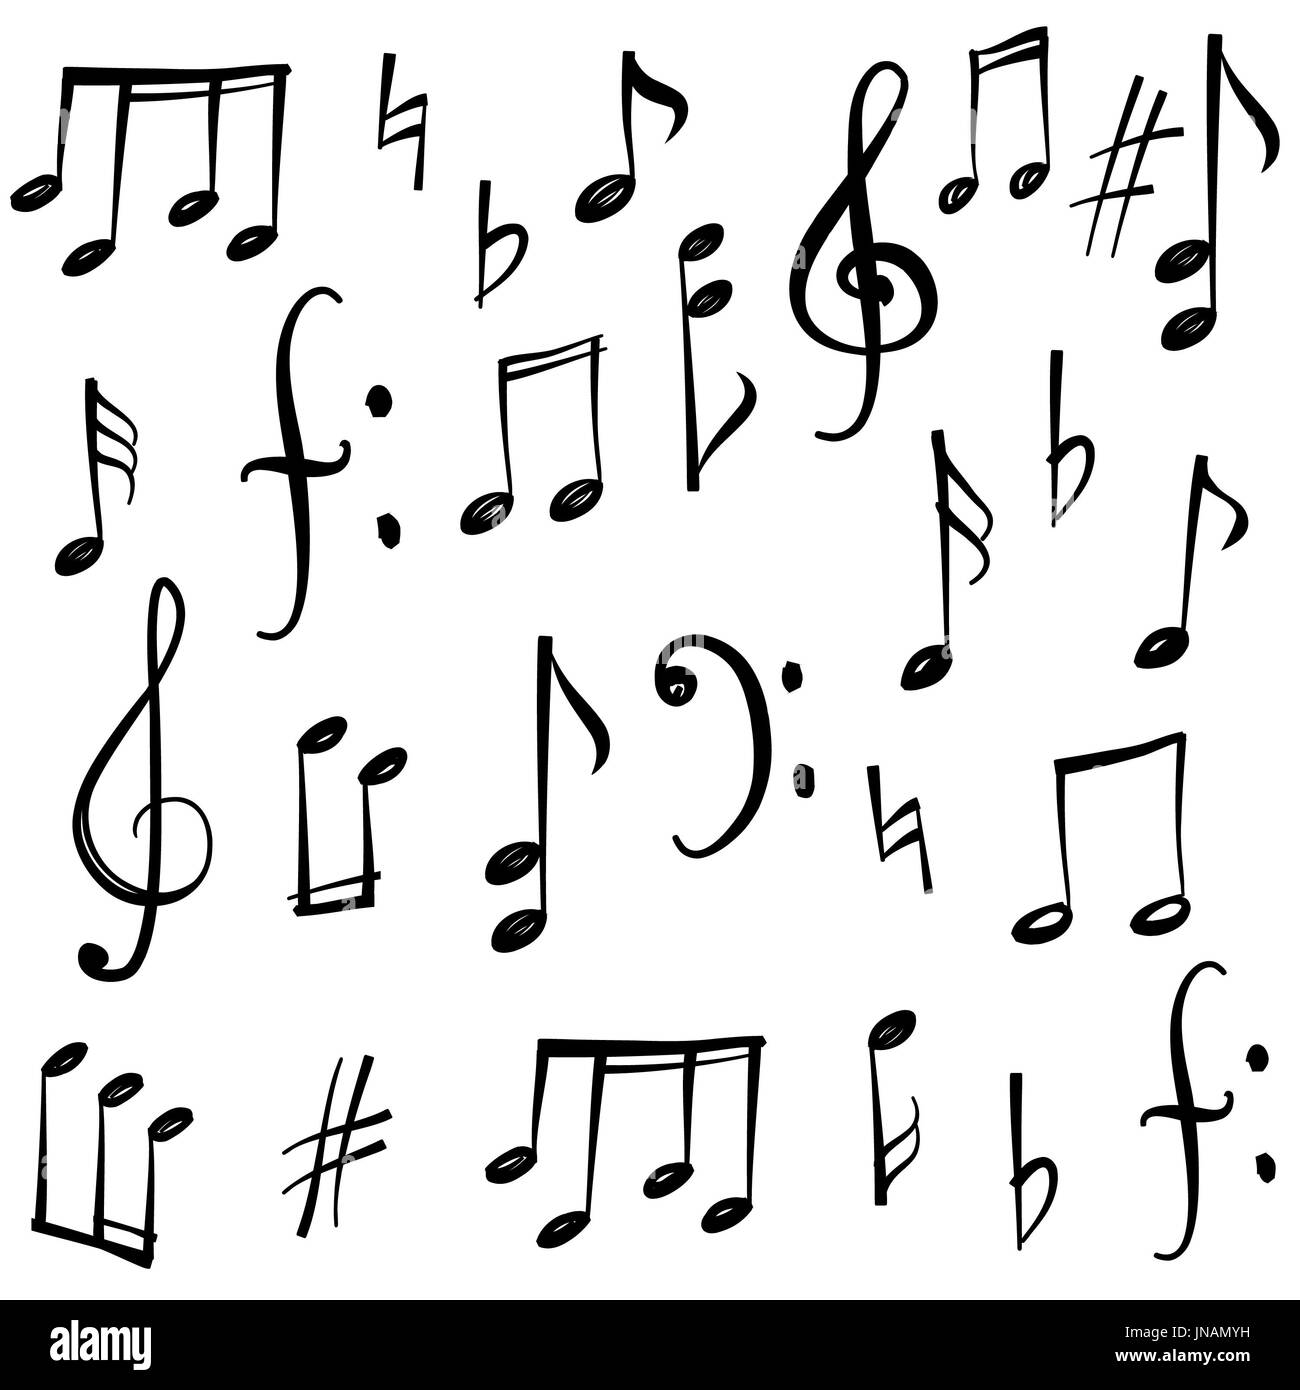 Music notes hand drawn and doodle design set Sketch of - stock vector  5411652 | Crushpixel